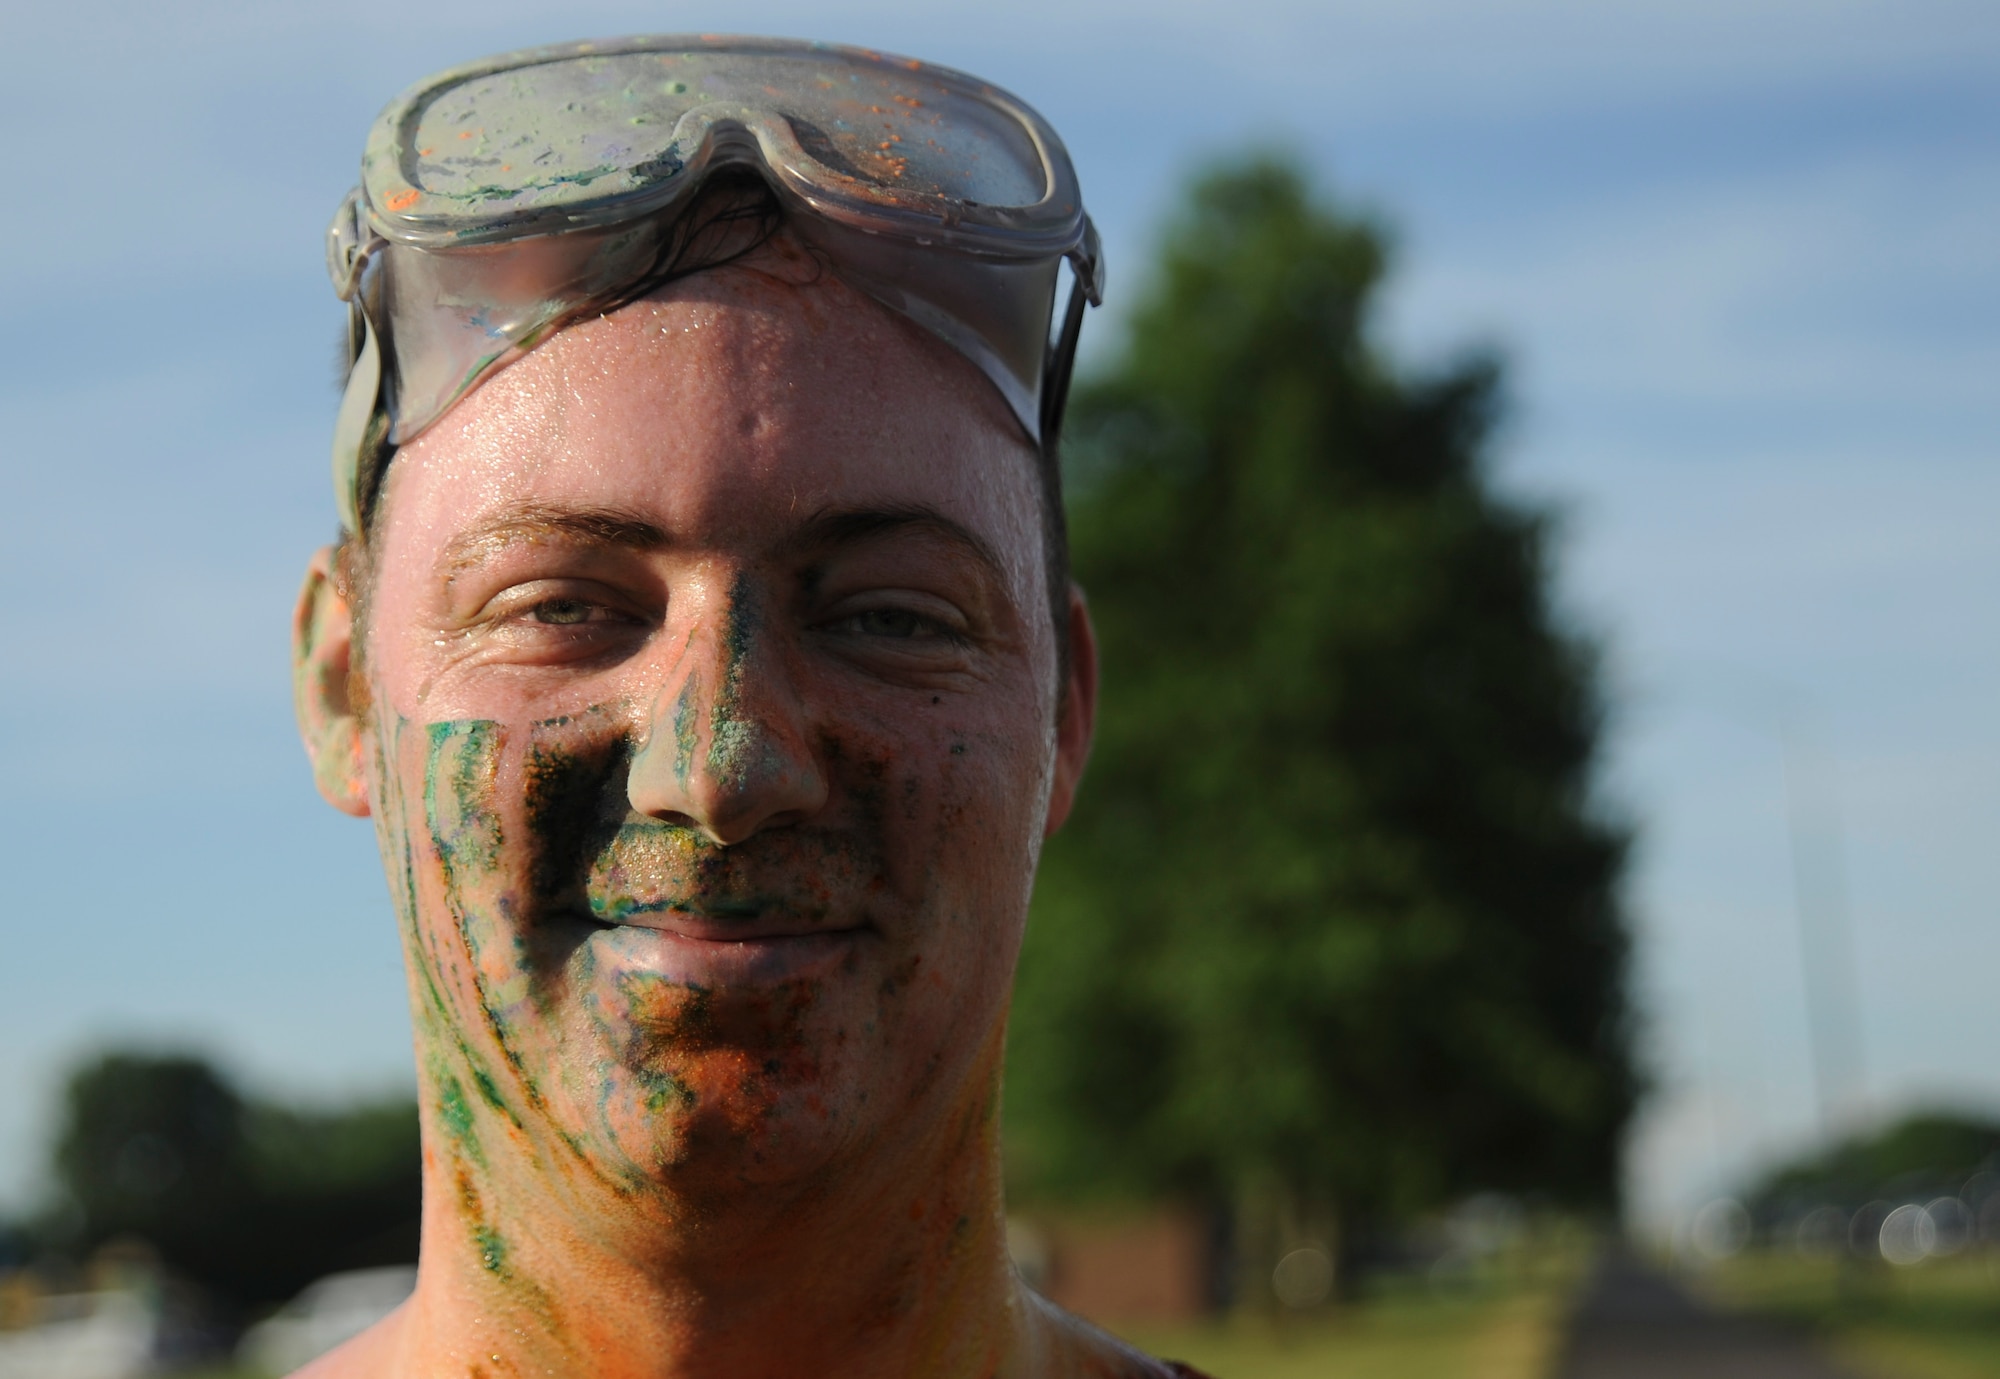 U.S. Air Force Airman 1st Class Zachary Taylor, a participant of the Lesbian, Gay, Bisexual and Transgender Pride Month Rainbow Run 5K, displays the effects of the colored powder after the run at Whiteman Air Force Base, Mo., June 24, 2016. Participants were given eye protection before the run to ensure their safety. (U.S. Air Force photo by Senior Airman Danielle Quilla)